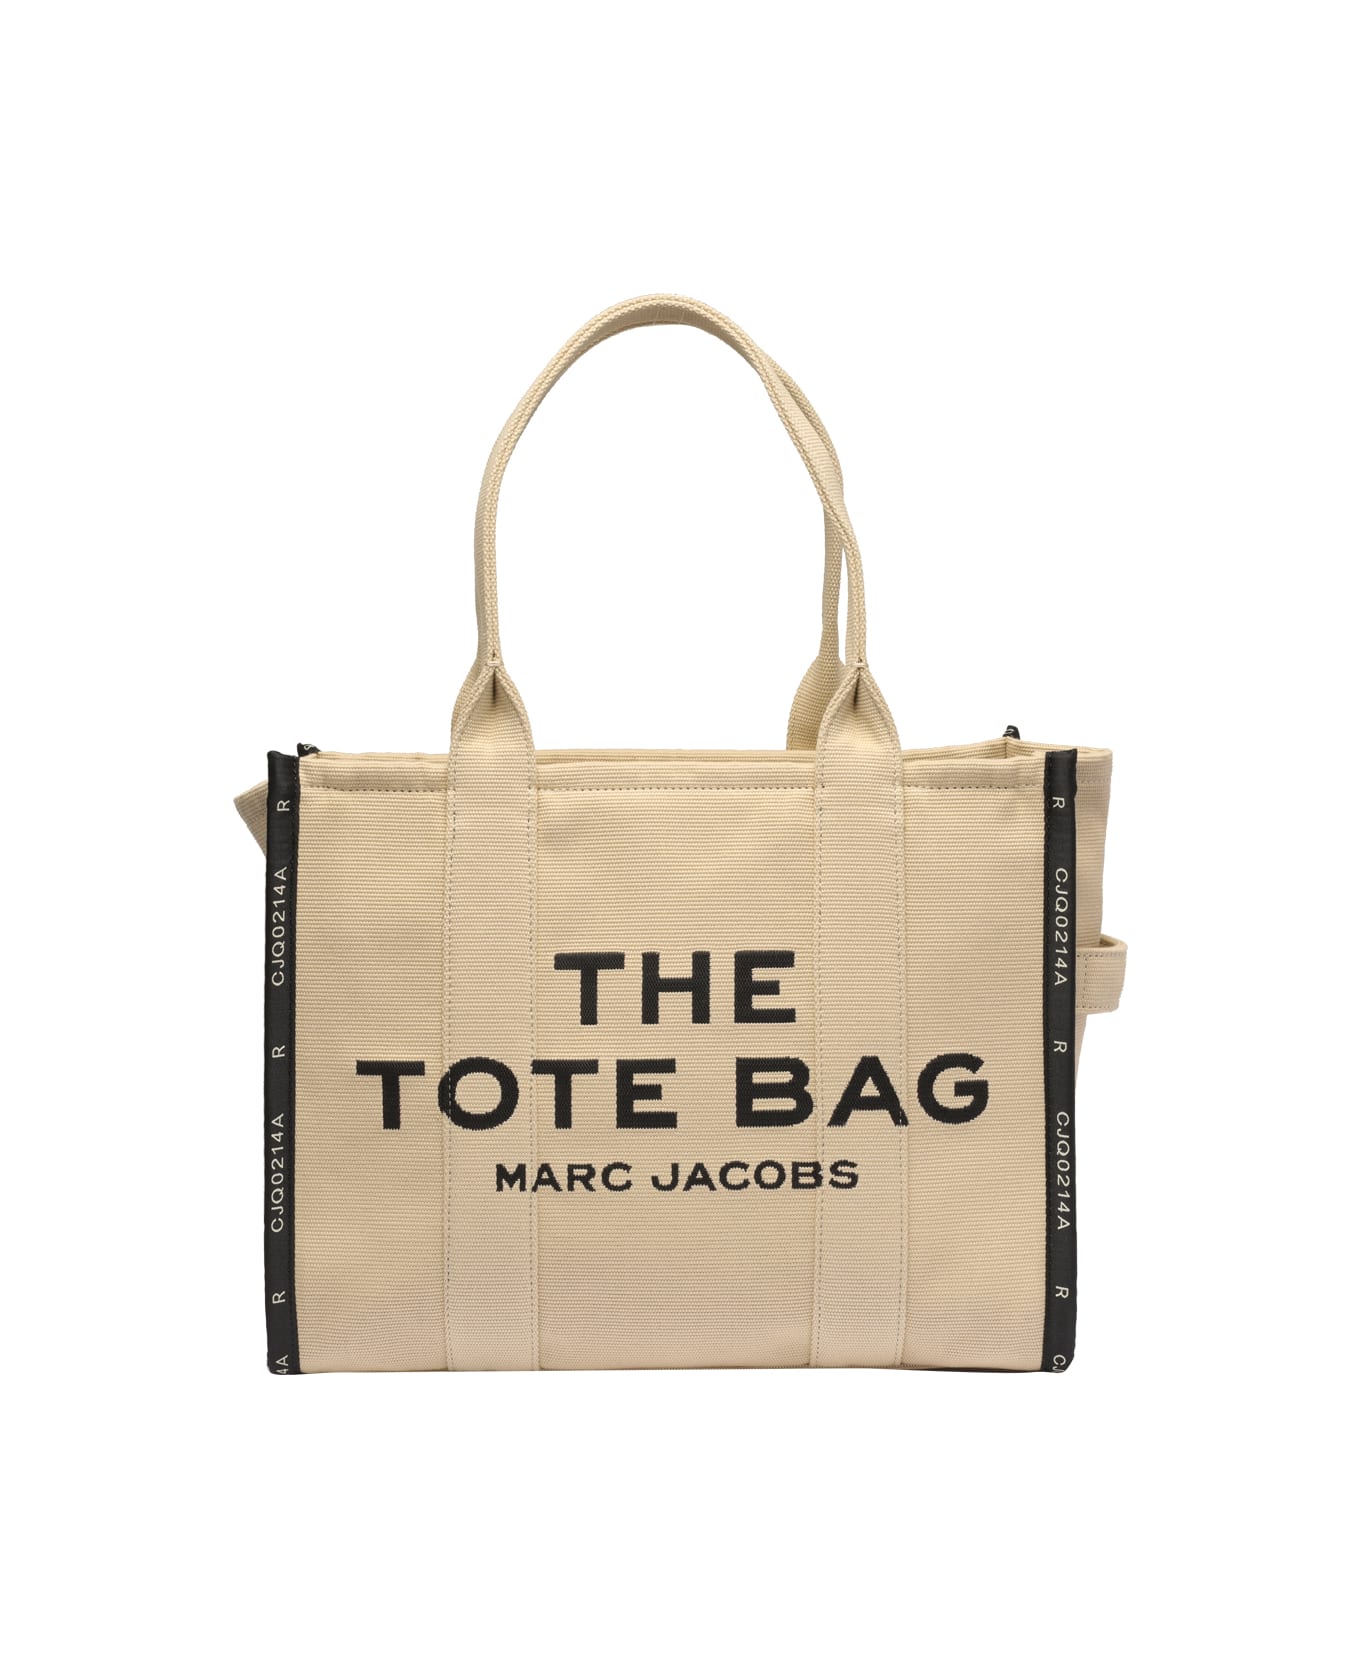 Marc Jacobs The Large Tote Bag - Beige